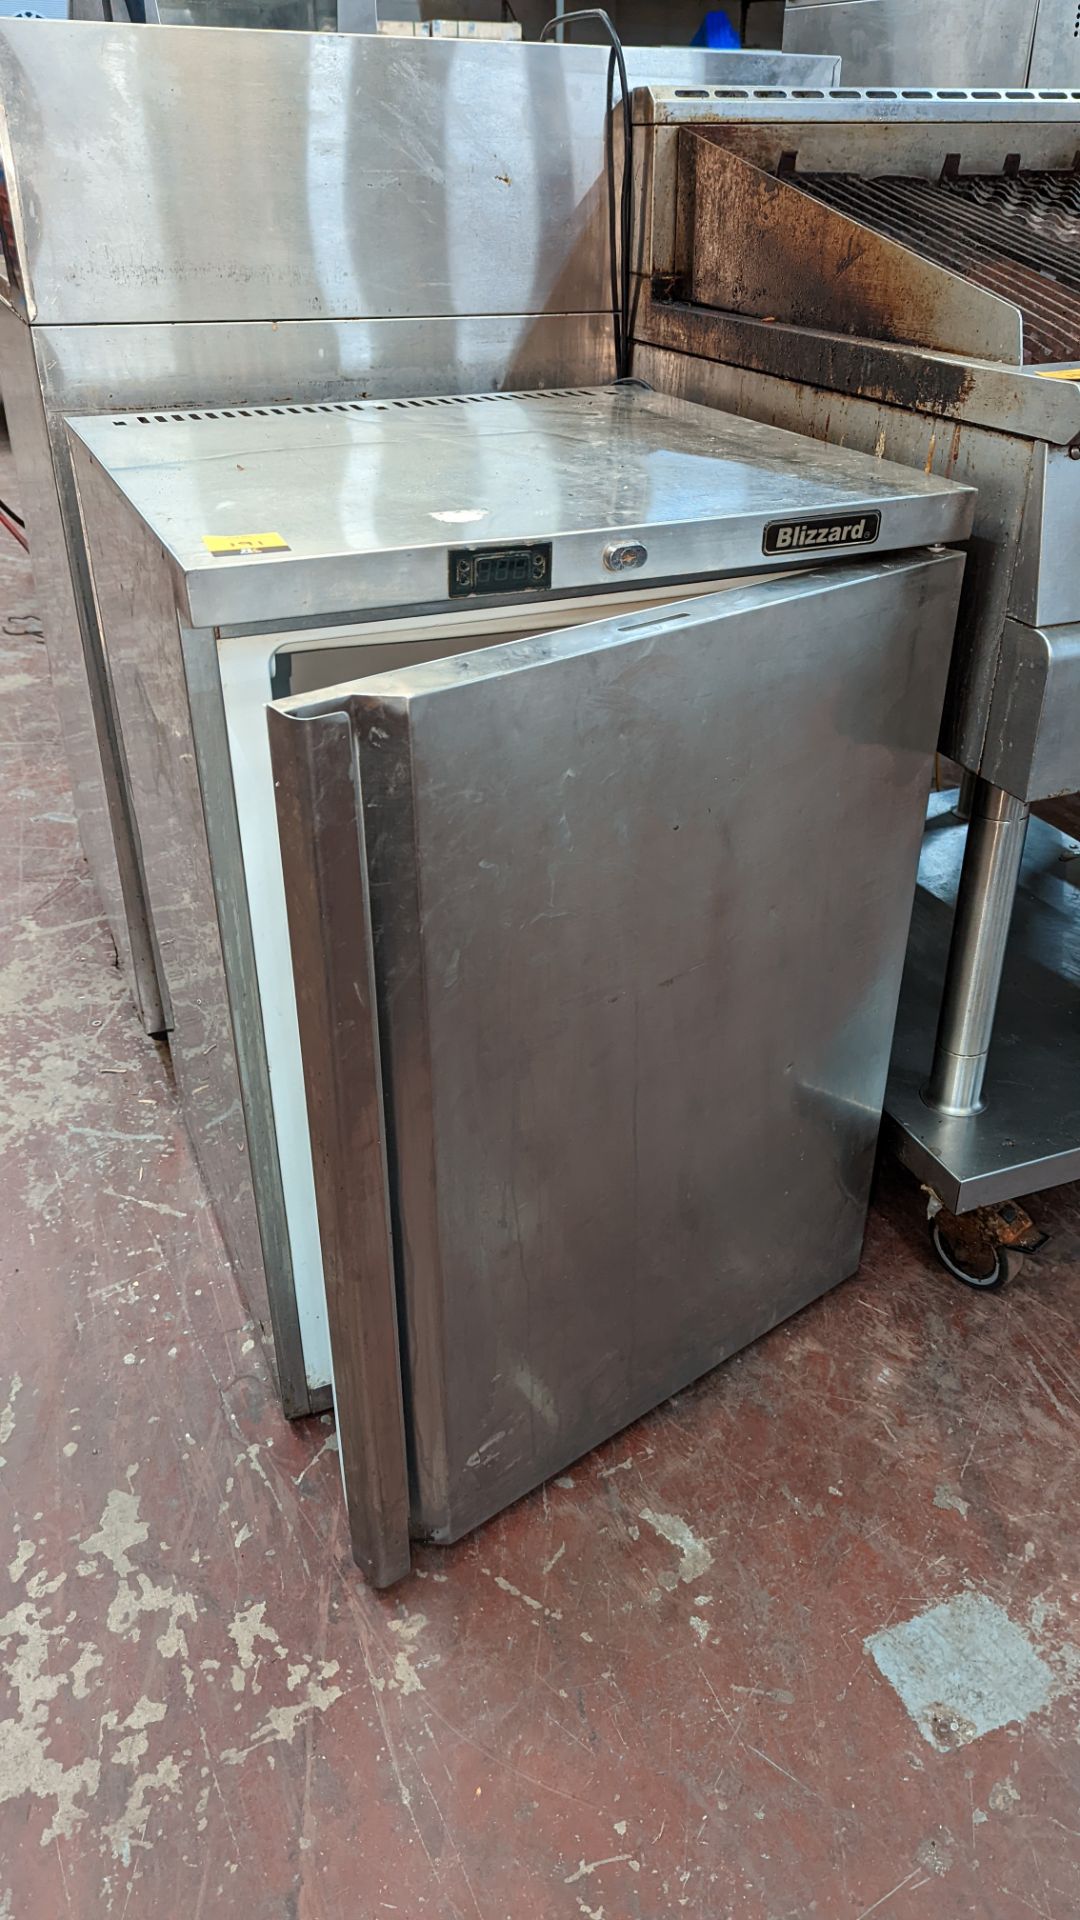 Blizzard stainless steel under counter commercial freezer - Image 2 of 5